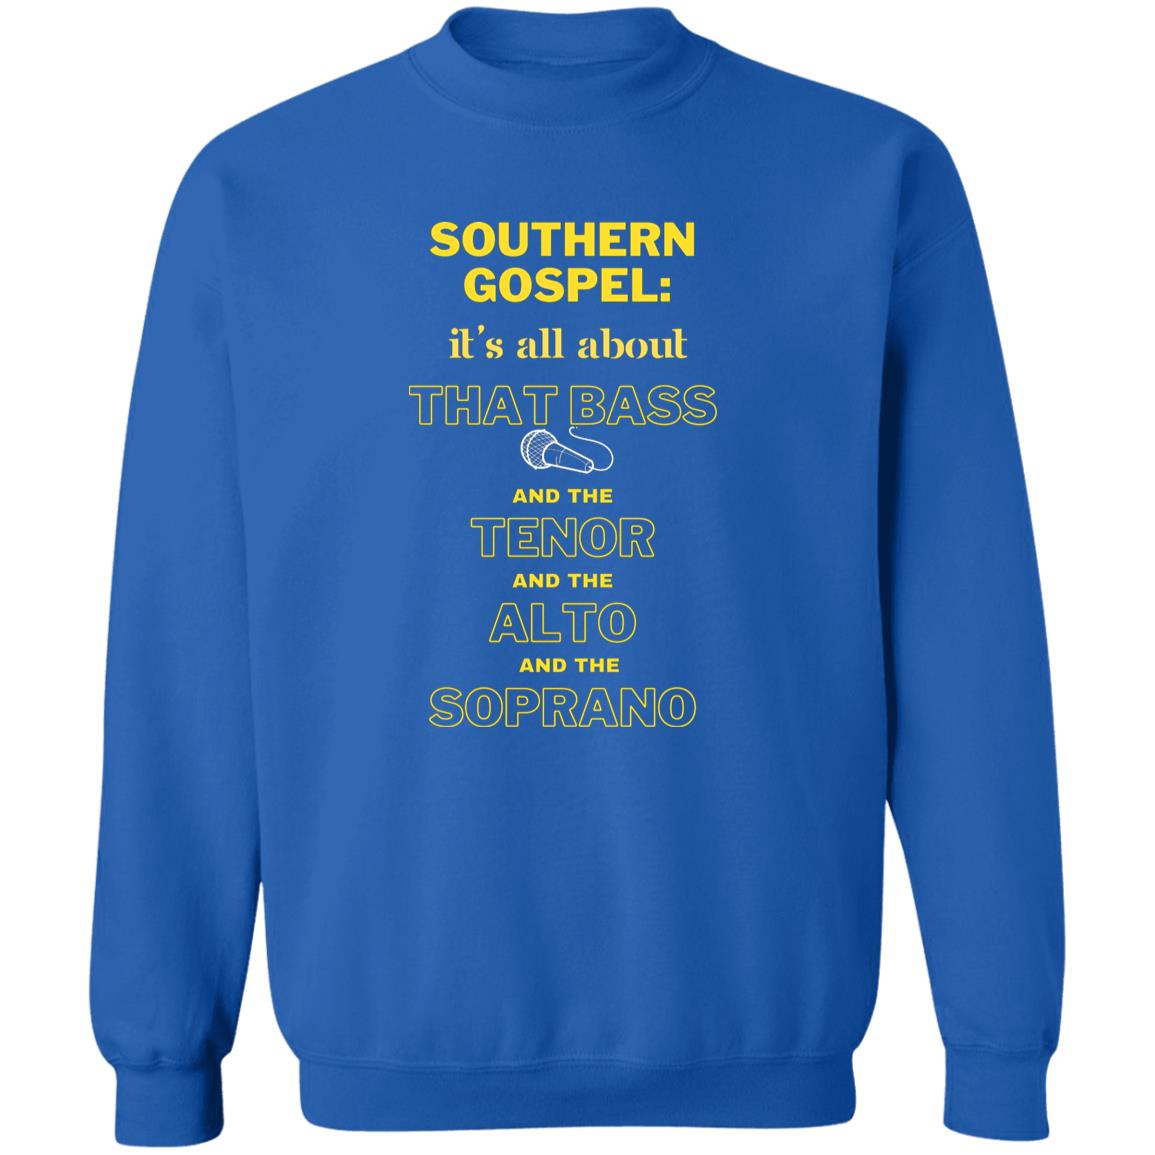 Southern Gospel: It's All About That Bass - Mixed Group Sweatshirt